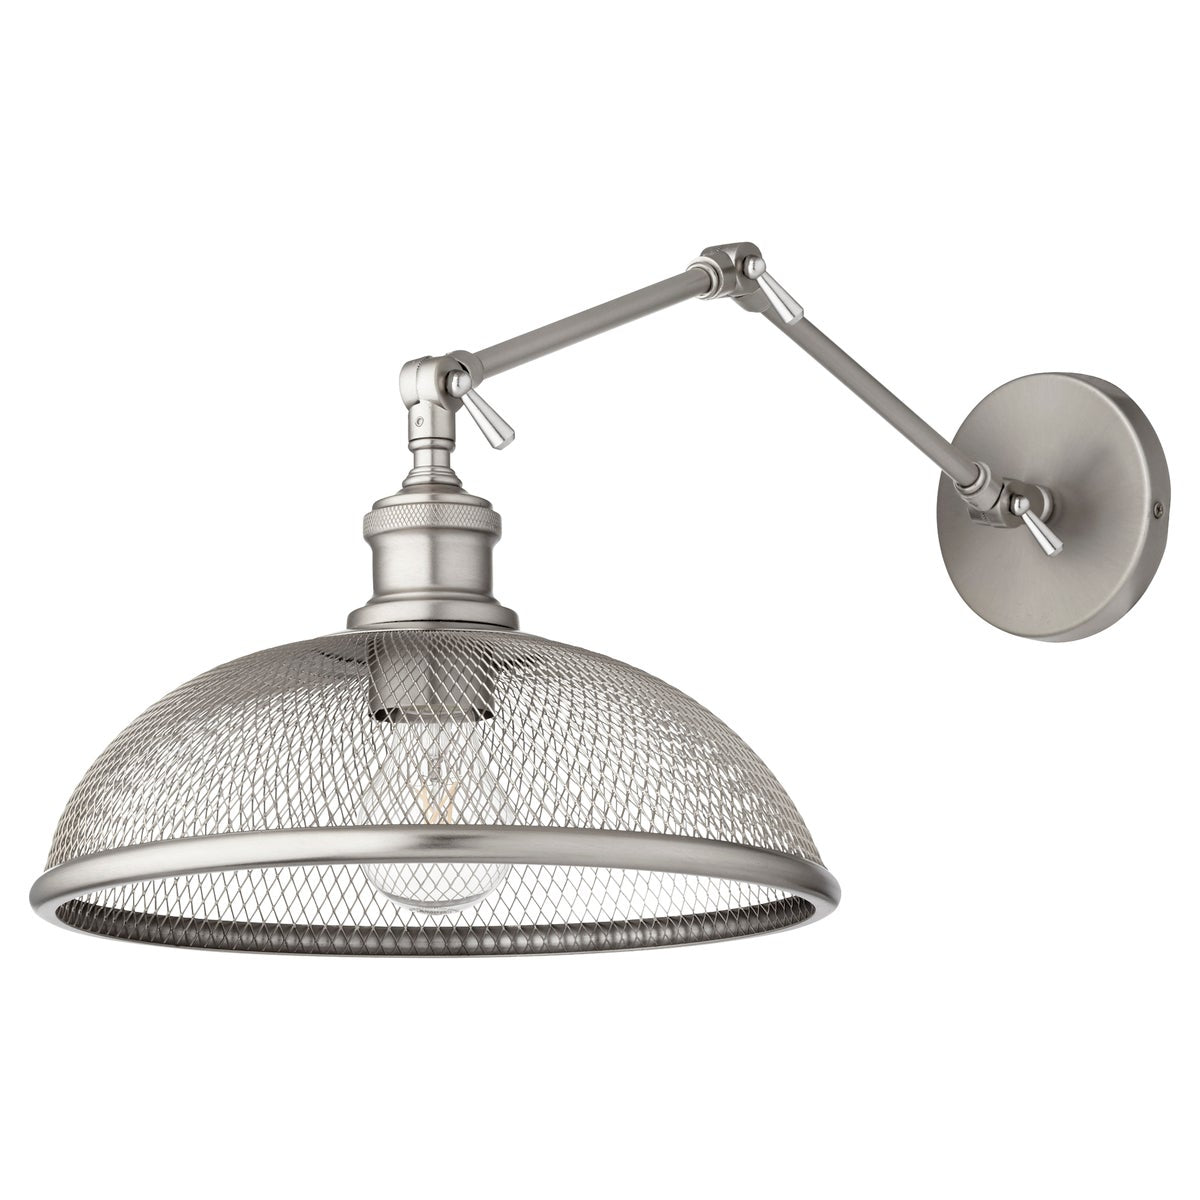 Industrial Wall Sconce with wire mesh shade and subtly shaded bulbs, showcasing crisscross patterns and repeating angles. Transitional styling for contemporary and traditional settings. Brand: Quorum International.